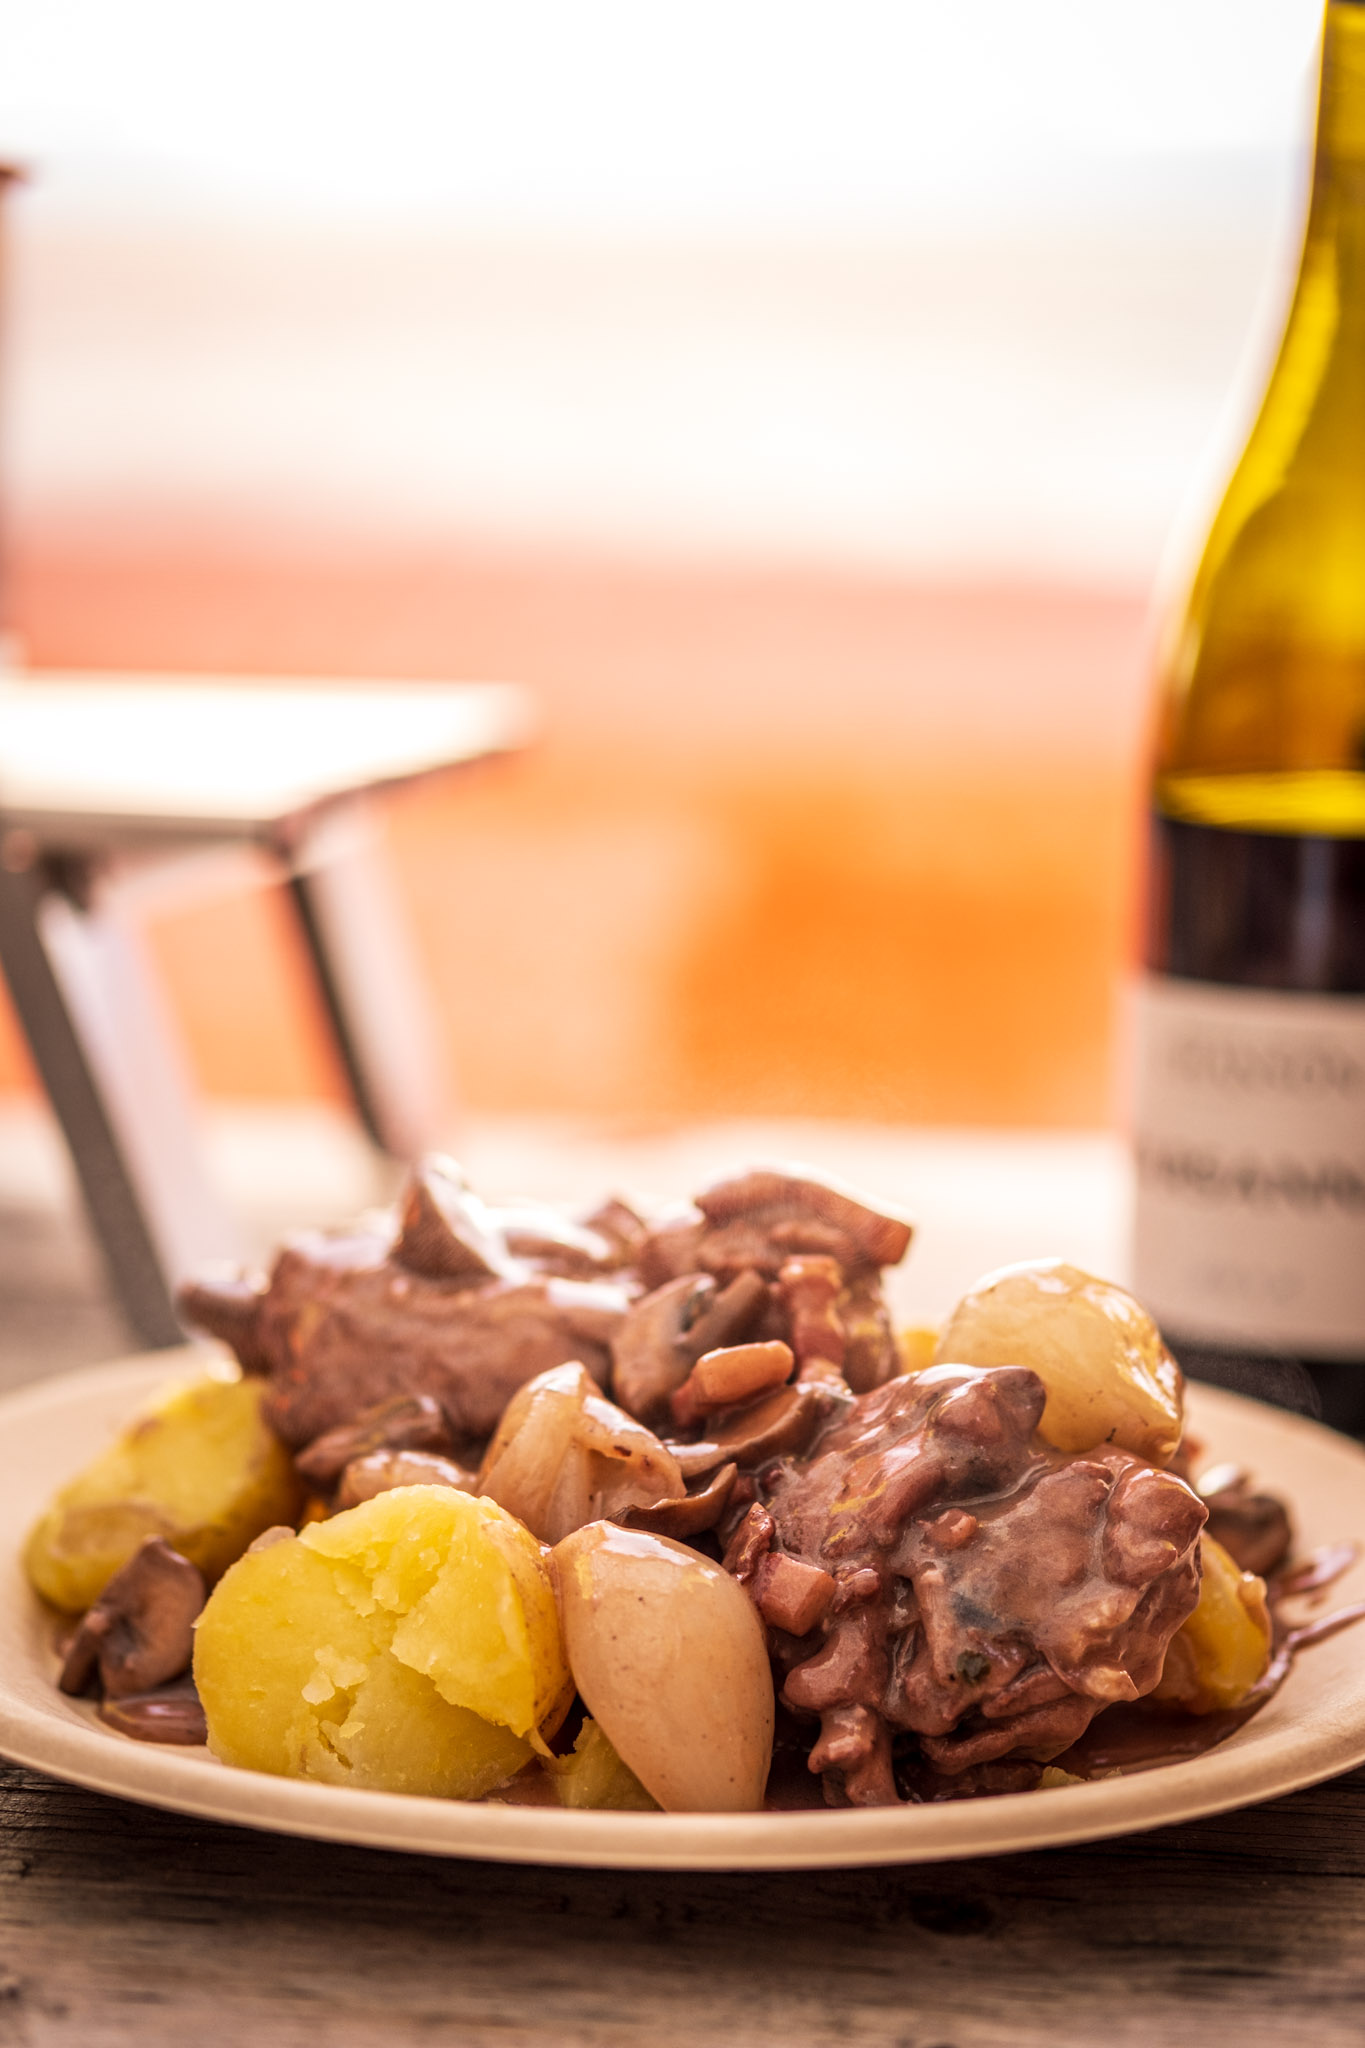 Plate of coq au vin with potatoes and a bottle of Burgundy wine on a campground table